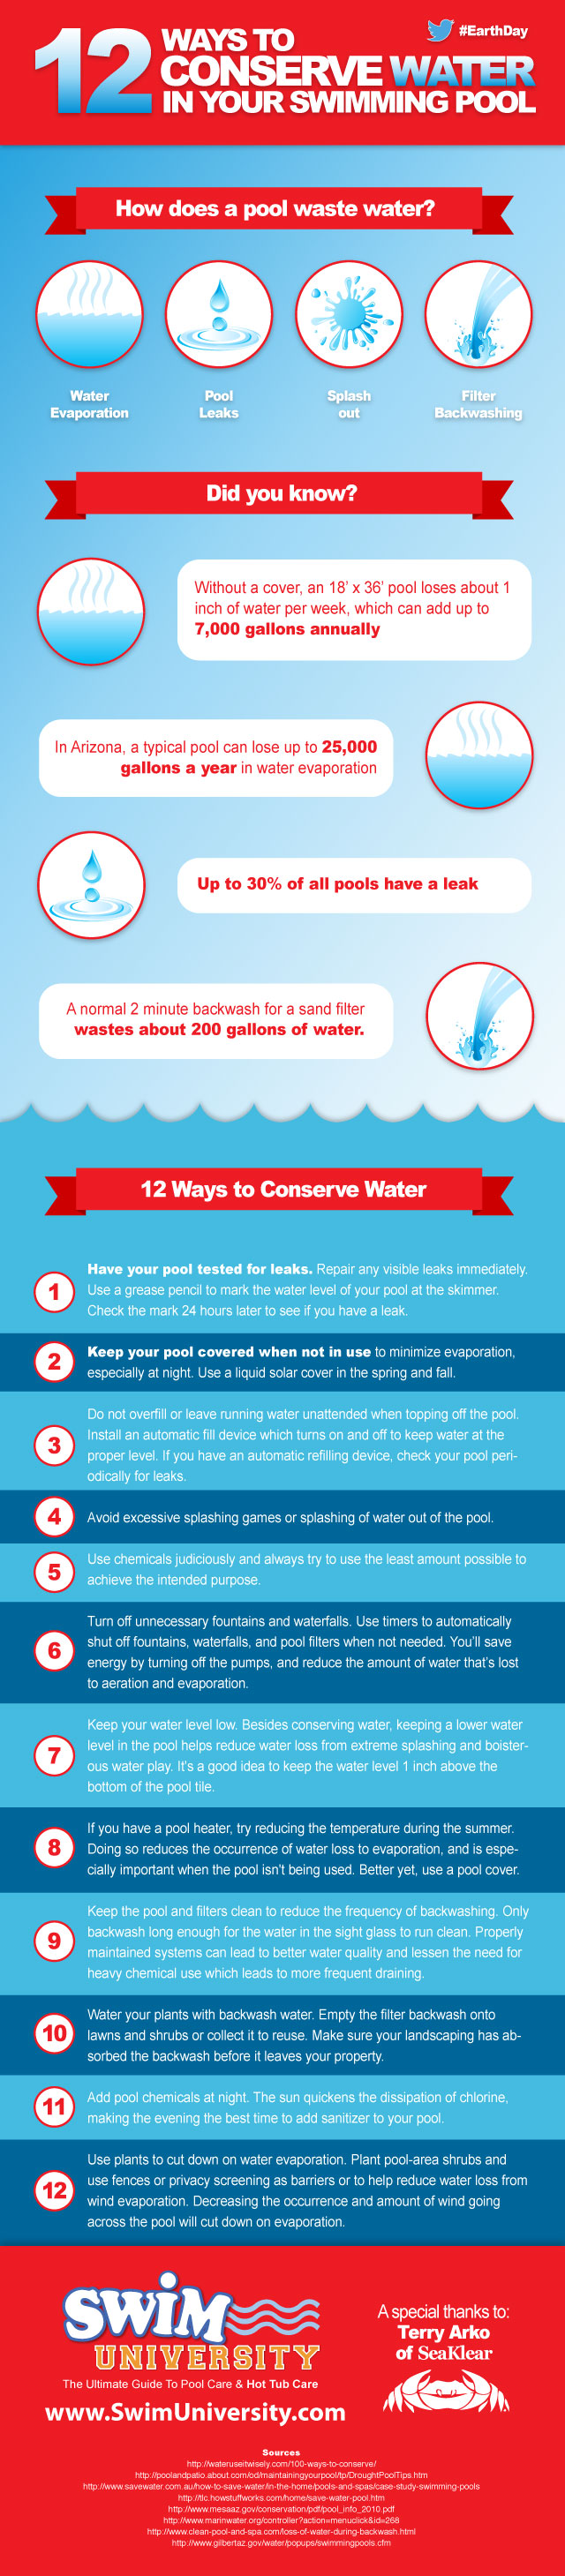 water-conservation-infographic.jpg